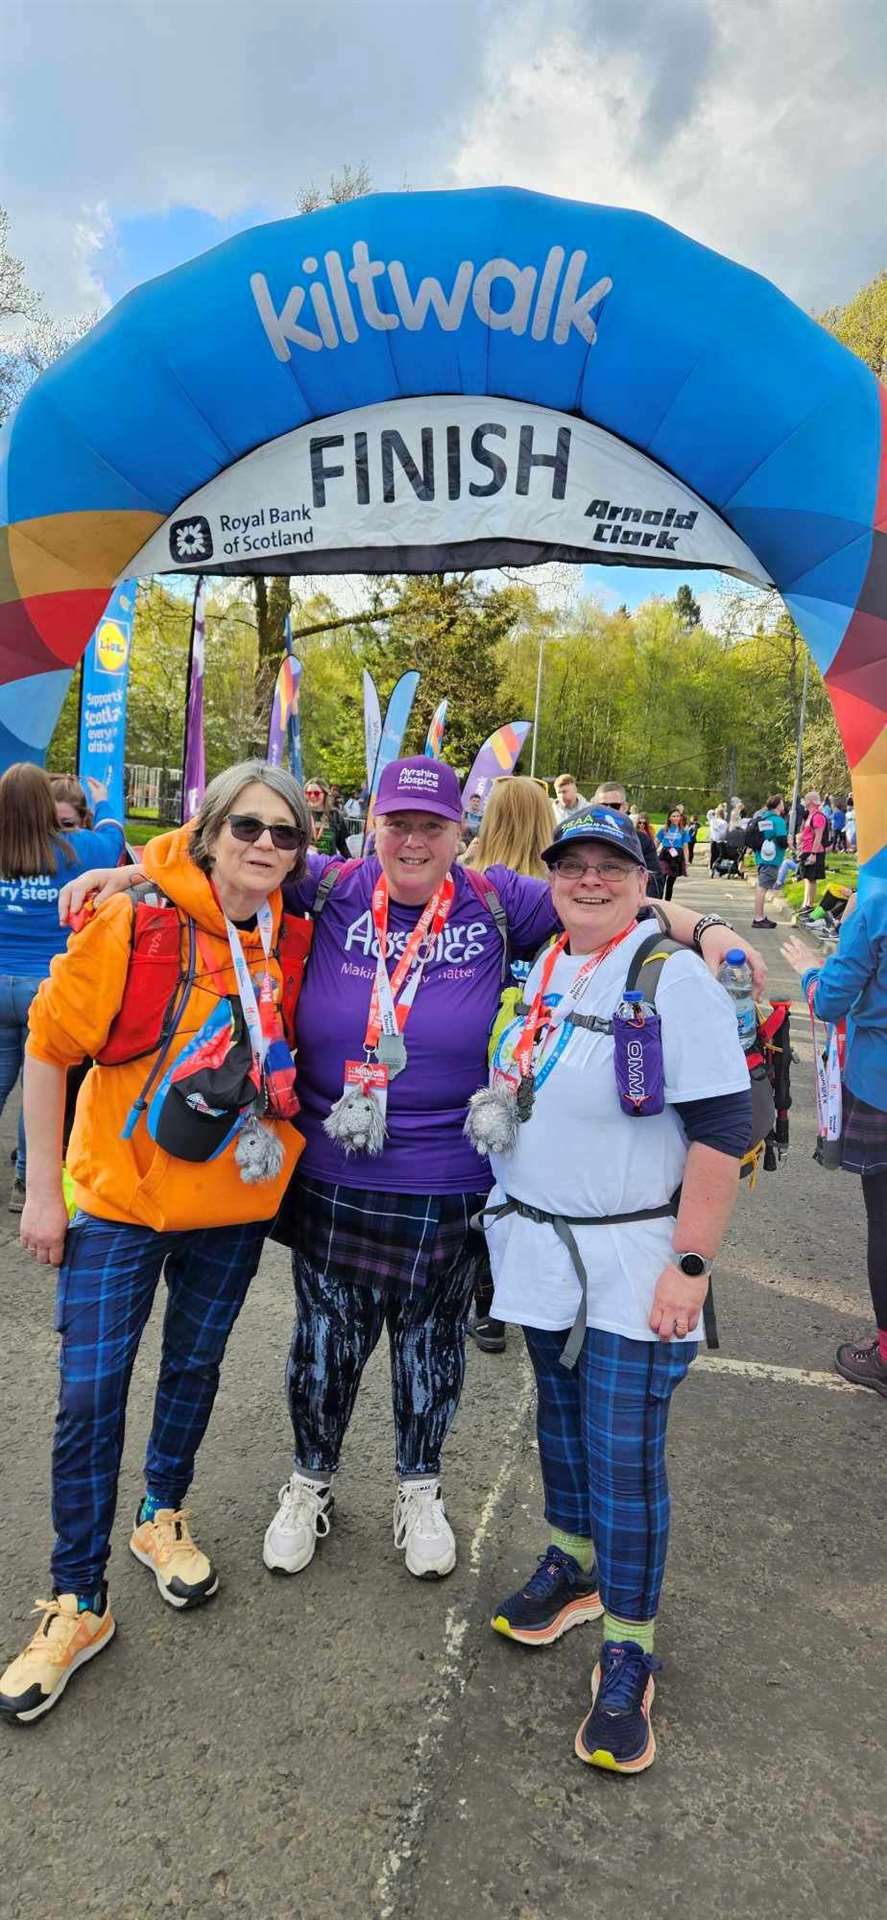 Hazel MacLean left at the finish line of the Glasgow Kiltwalk's Mighty Stride with friends Hazel Murdoch, who was walking for Ayrshire Hospice, and Jjakki Kyle who was walking for Scotland's Charity Air Ambulance.